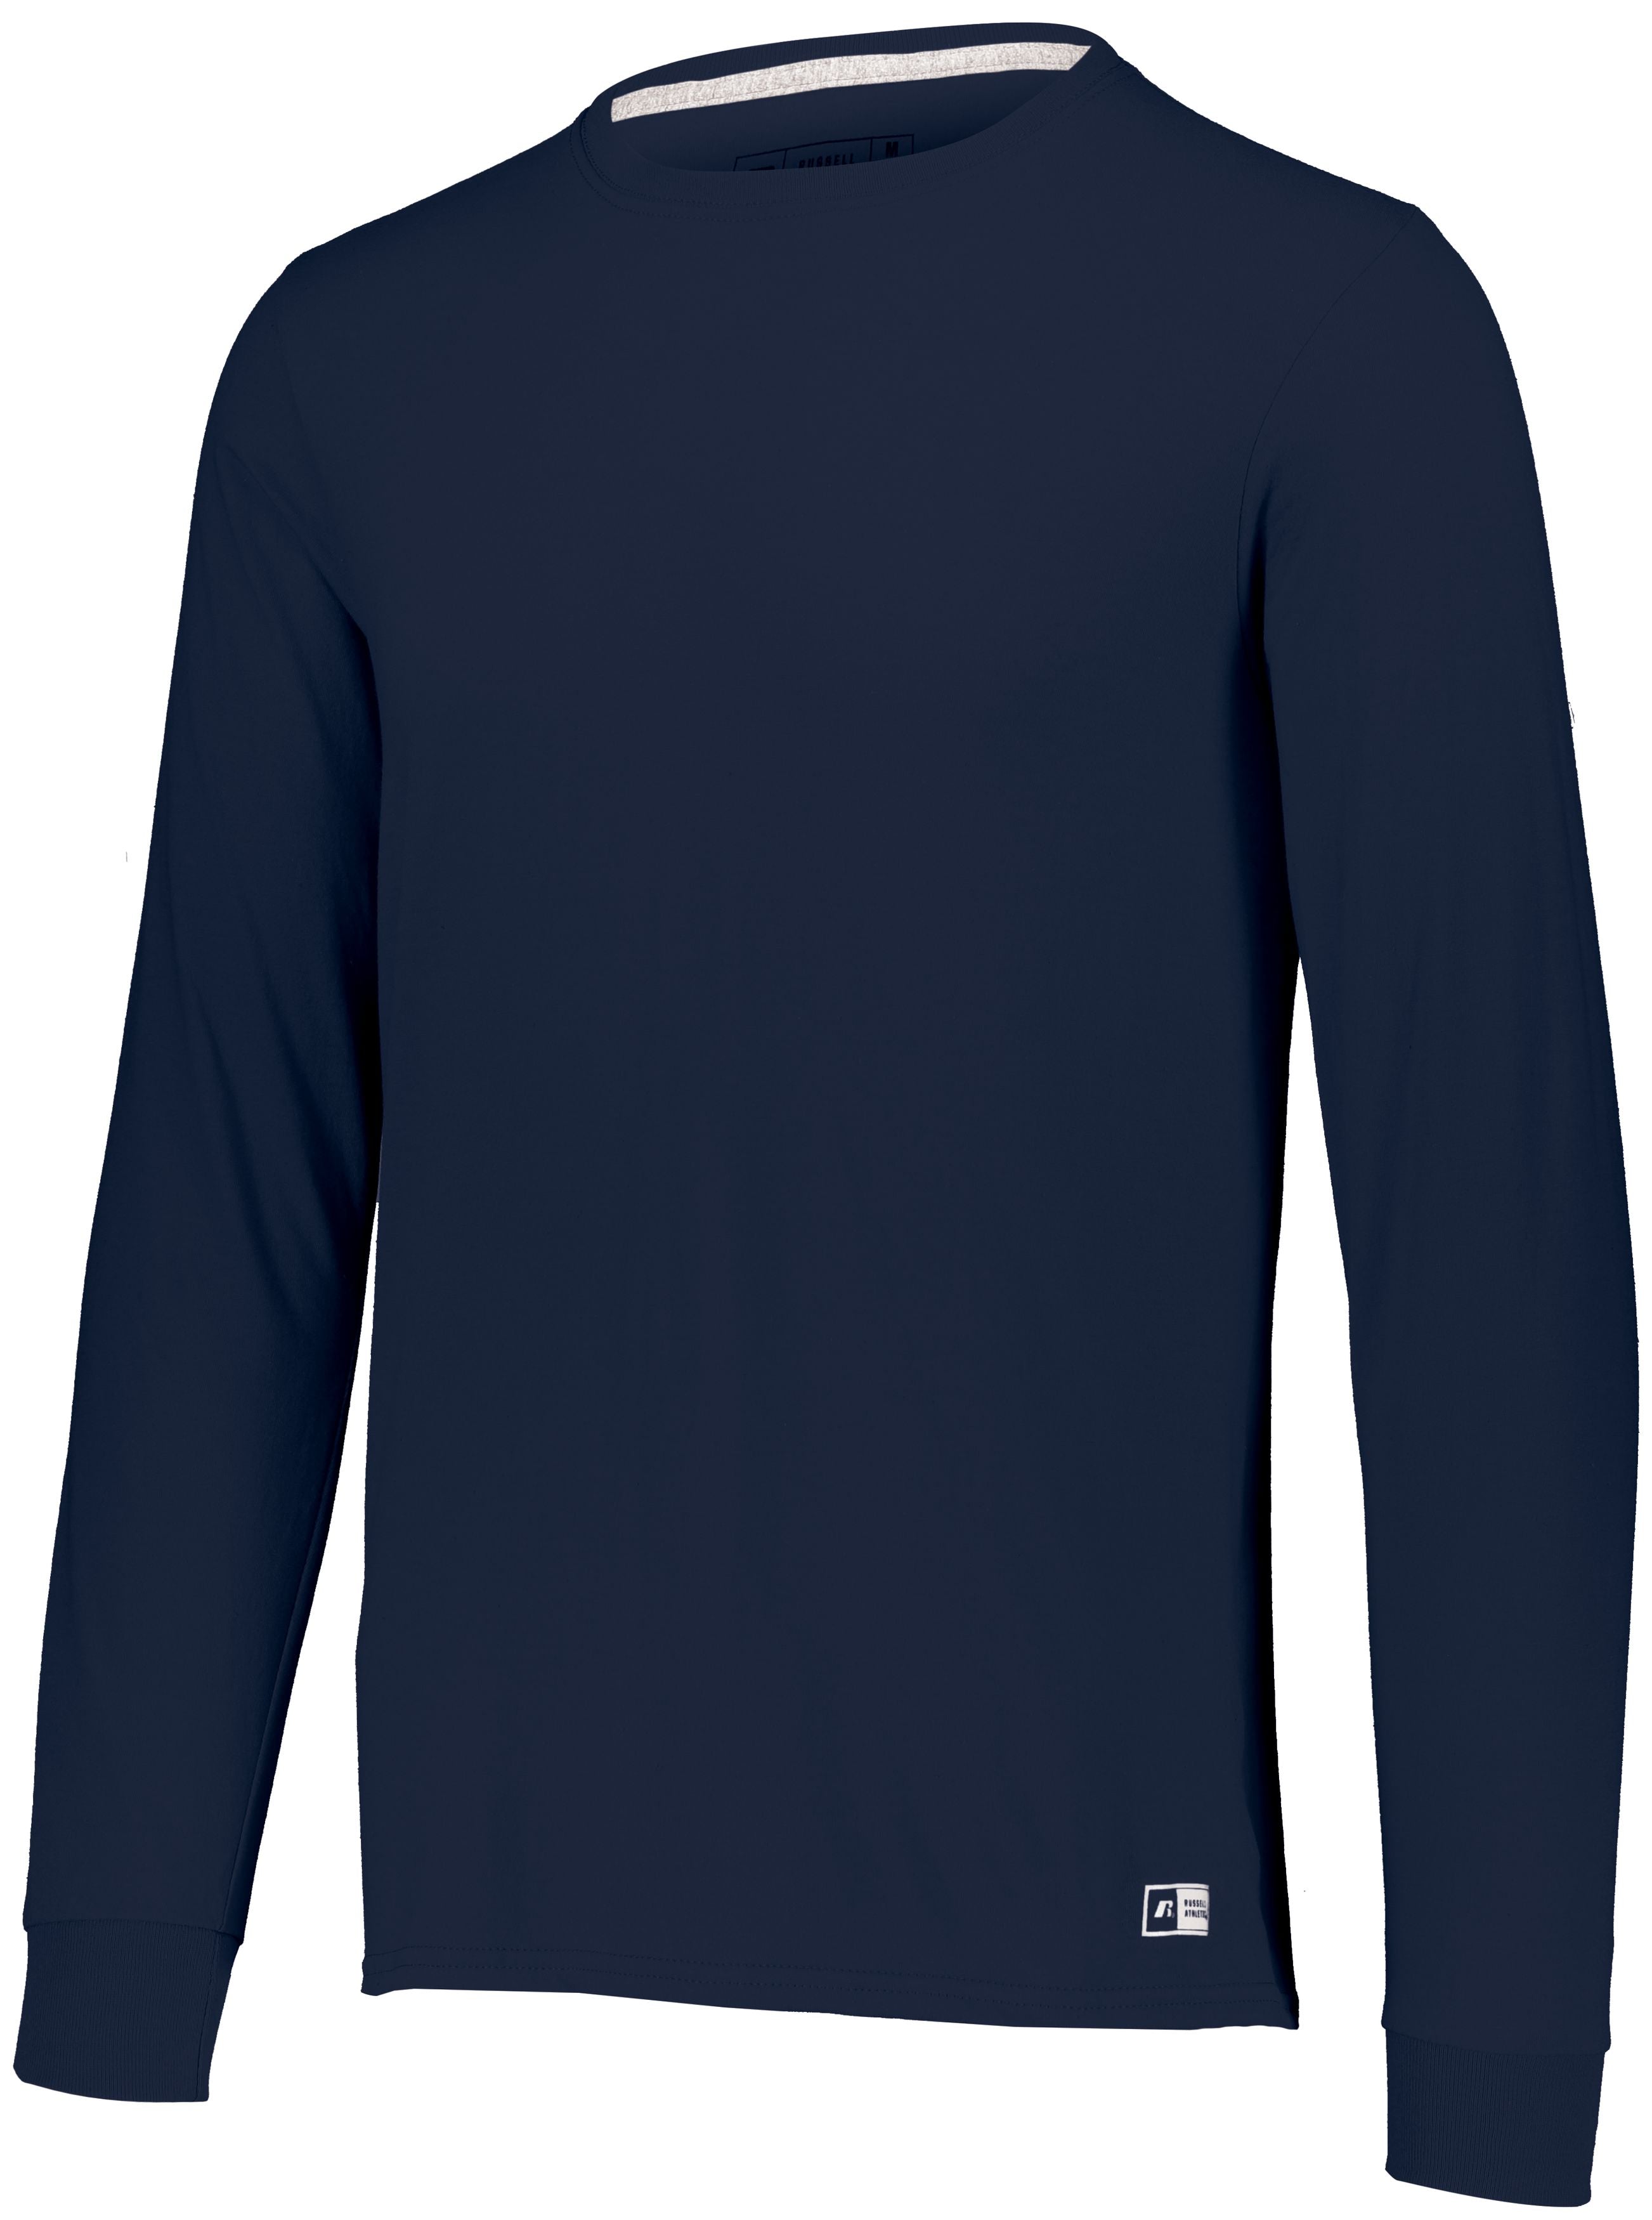 Russell Athletic Essential Long Sleeve Tee in Navy  -Part of the Adult, Adult-Tee-Shirt, T-Shirts, Russell-Athletic-Products, Shirts product lines at KanaleyCreations.com